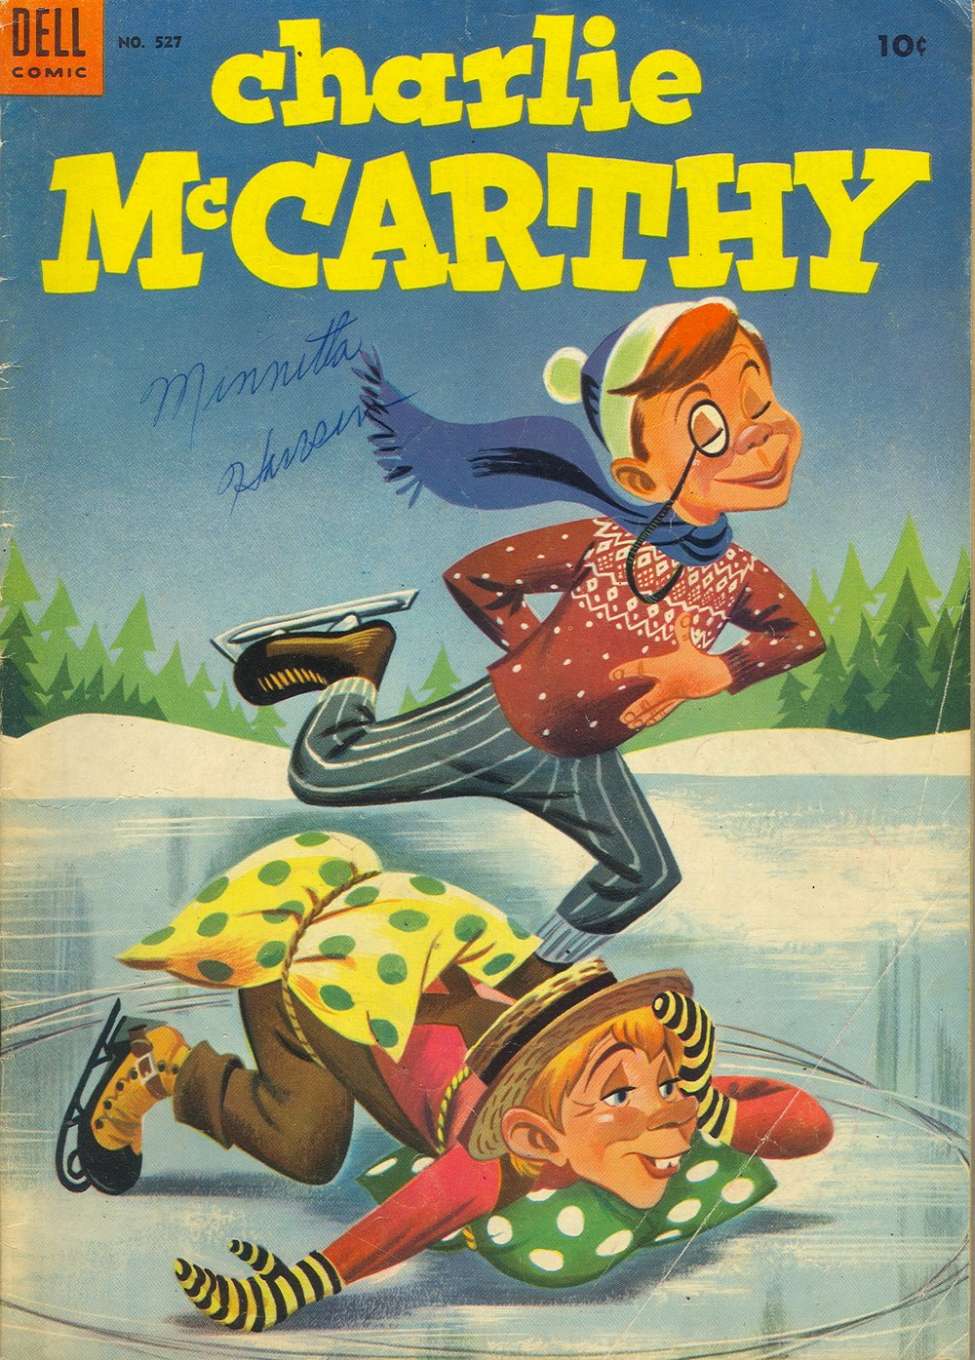 Book Cover For 0527 - Charlie McCarthy